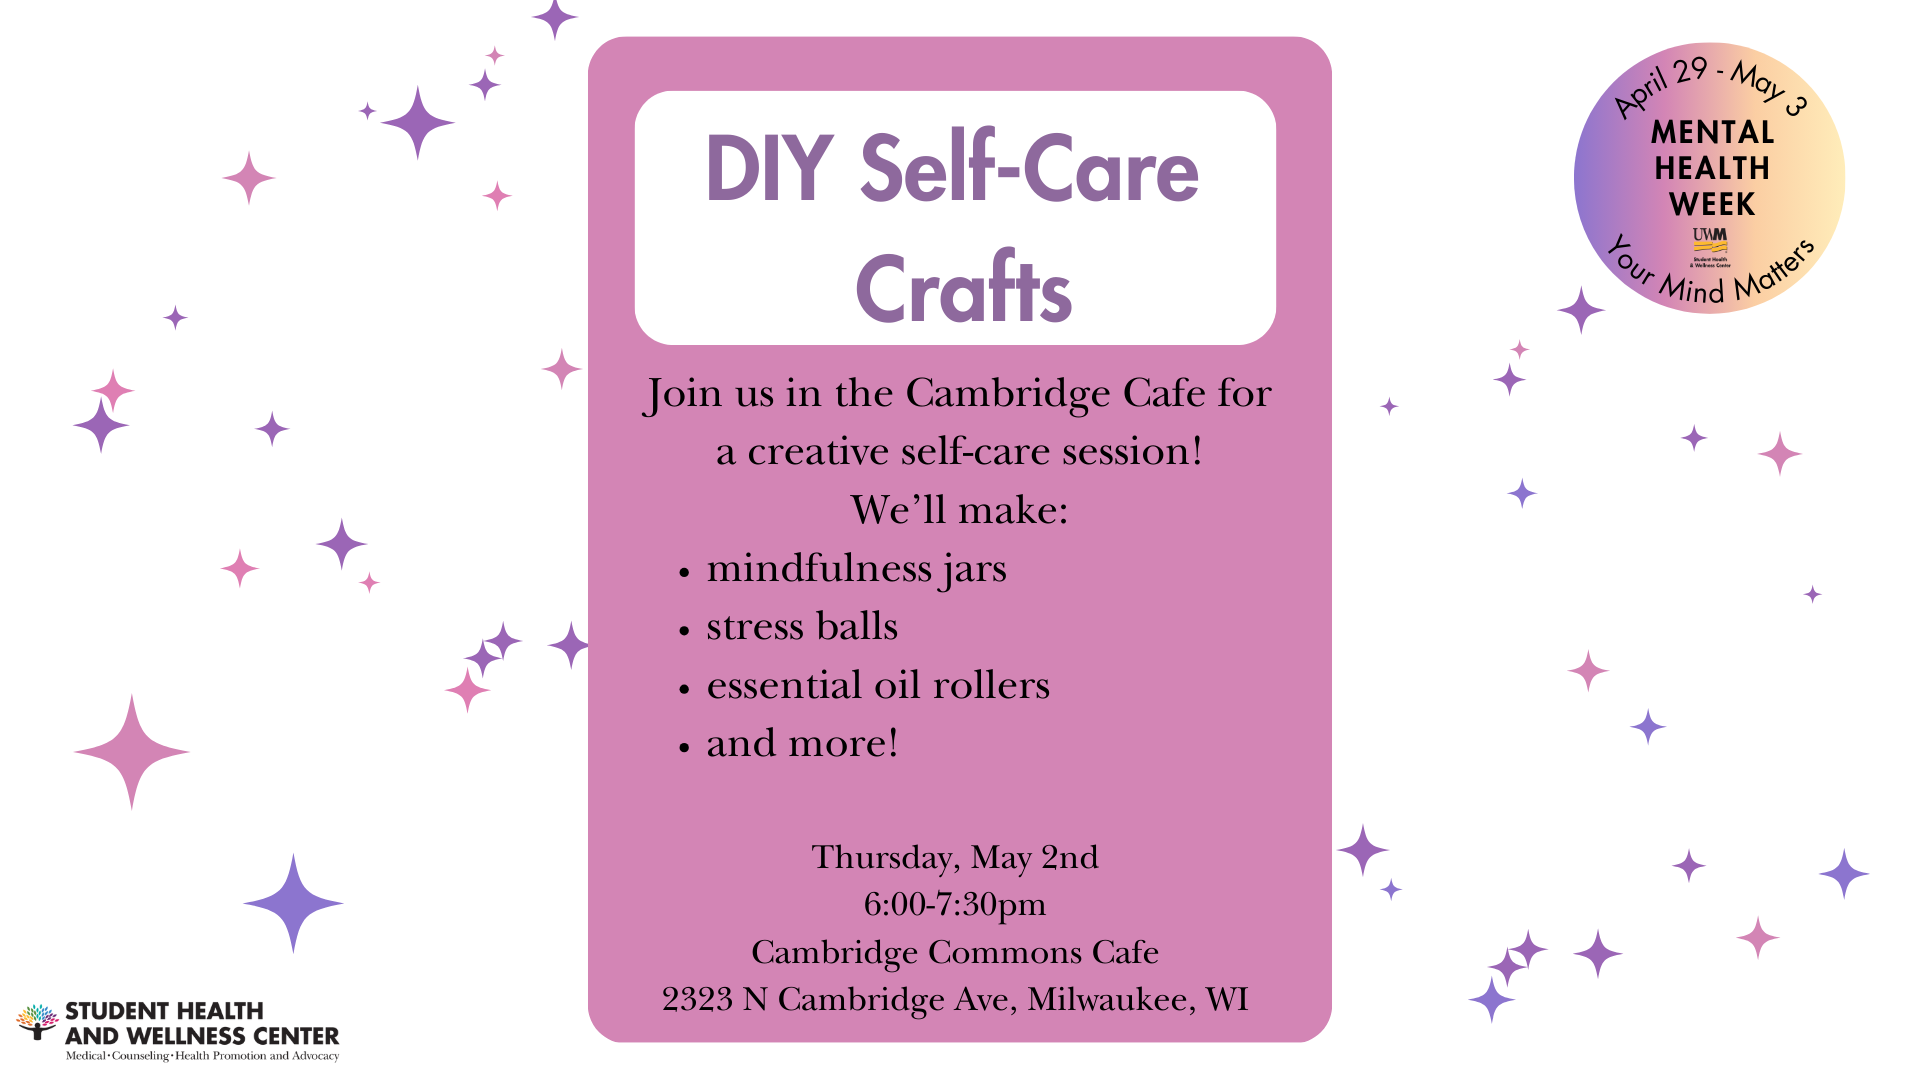 A graphic with information about an event to make self-care crafts and kits in Cambridge Commons.